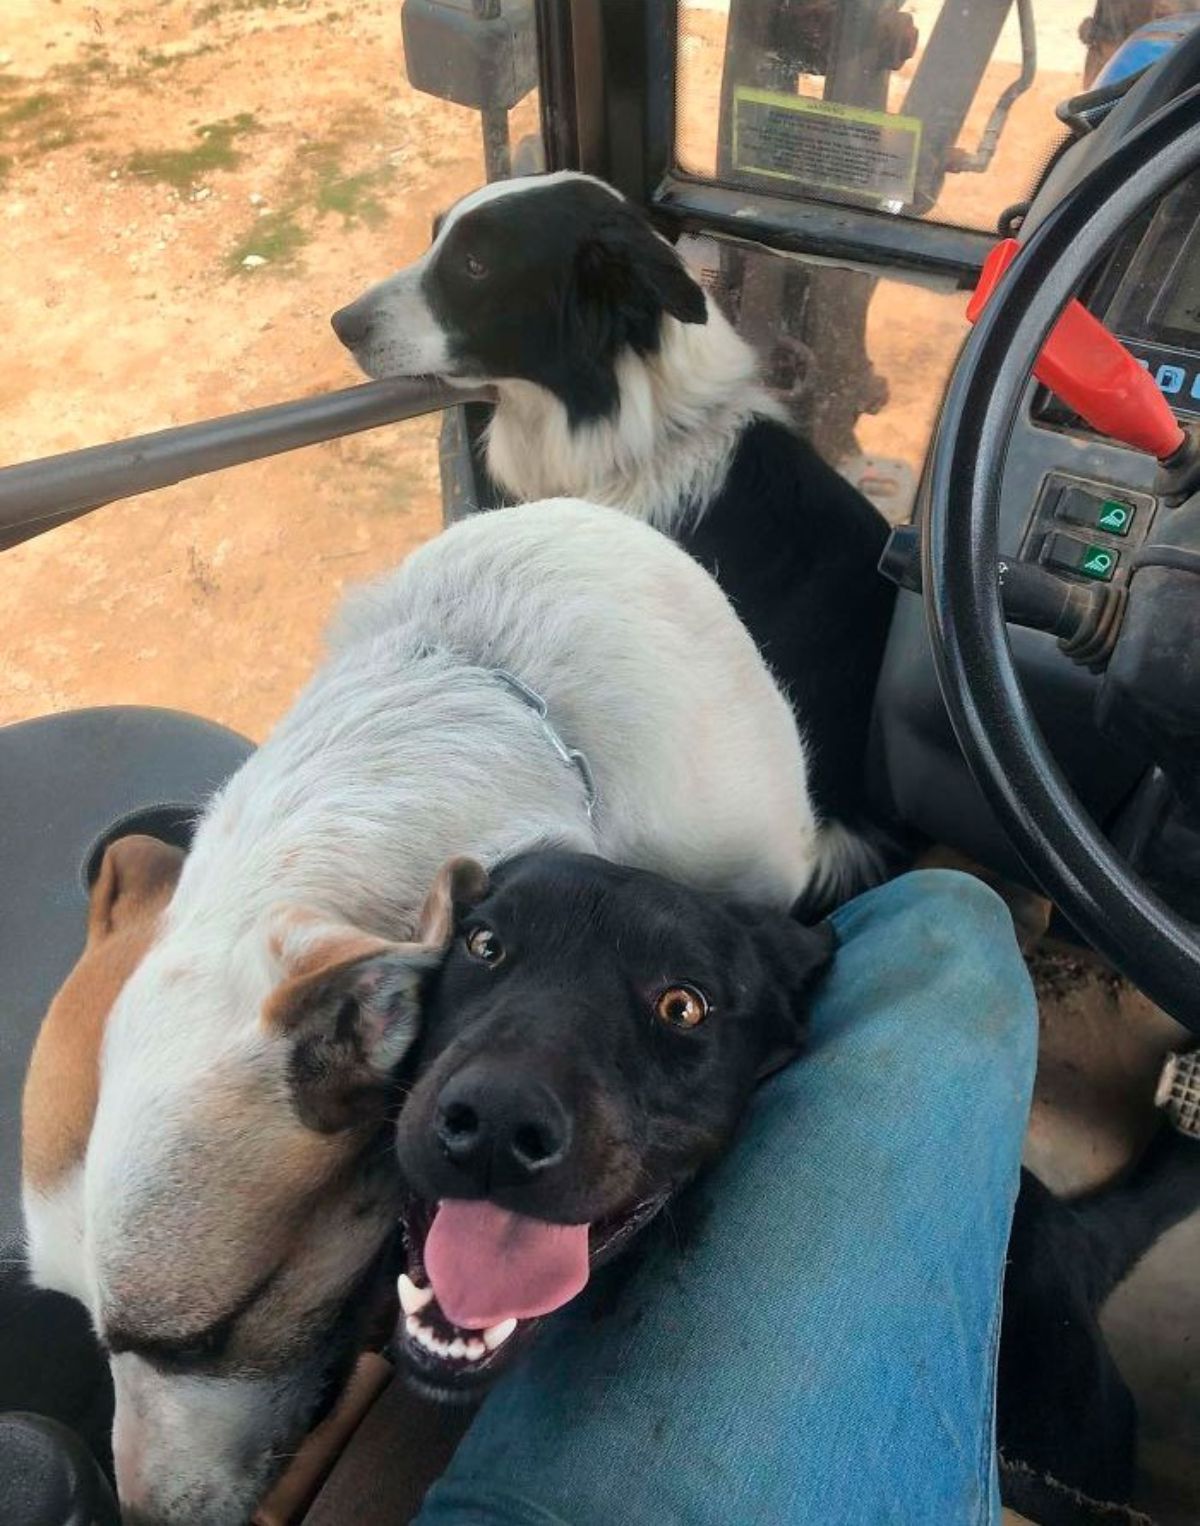 black and white dog placing head on metal railing looking out with white and brown dog and black dog trying to climb on someone's lap inside a tractor